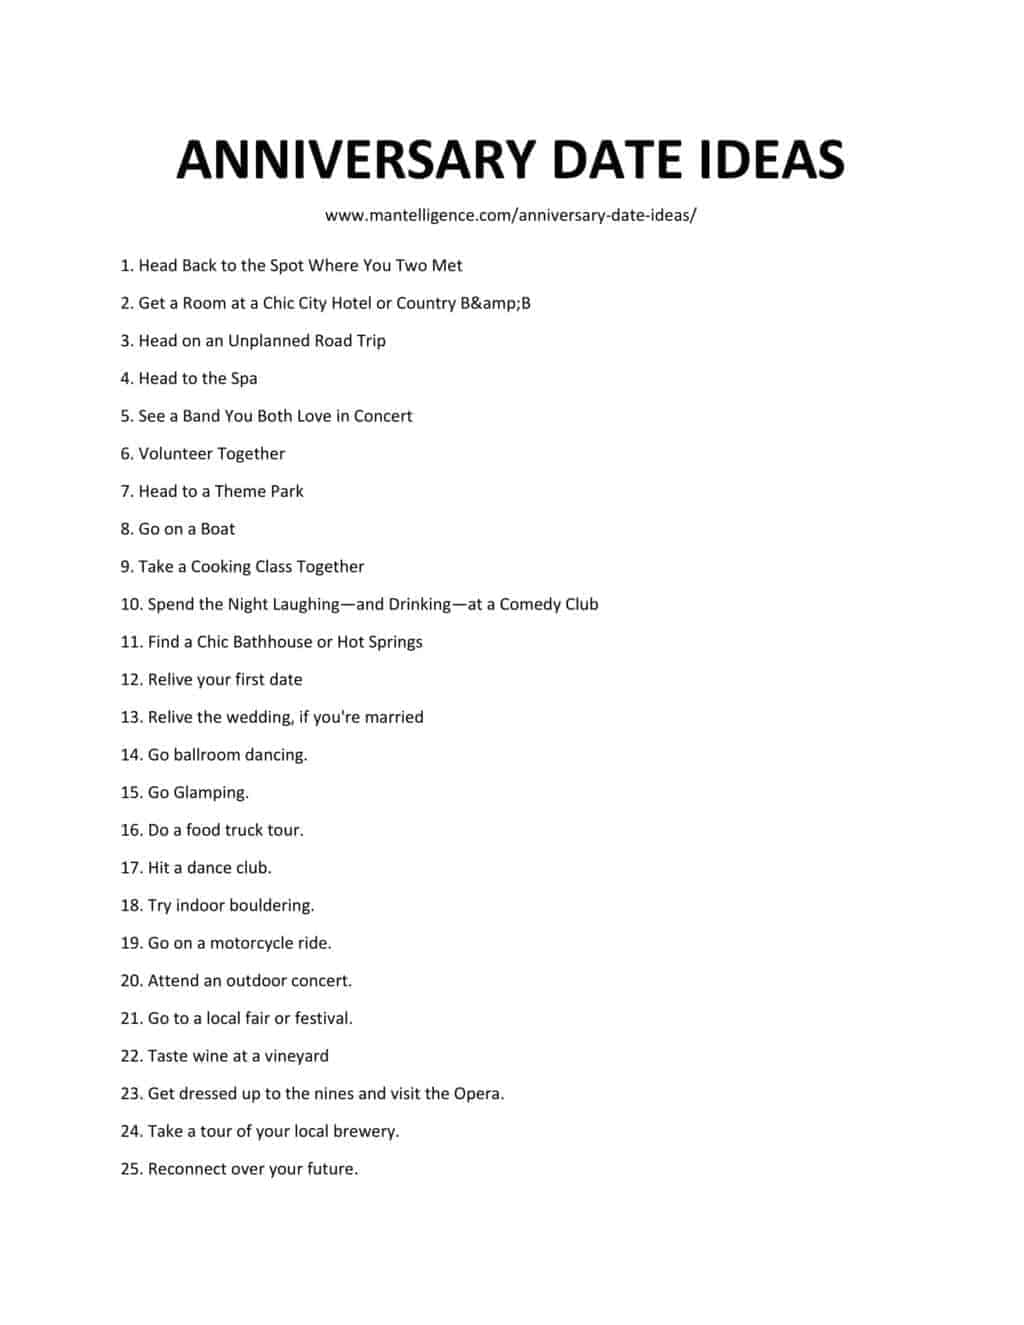 Downloadable list of Anniversary date ideas 